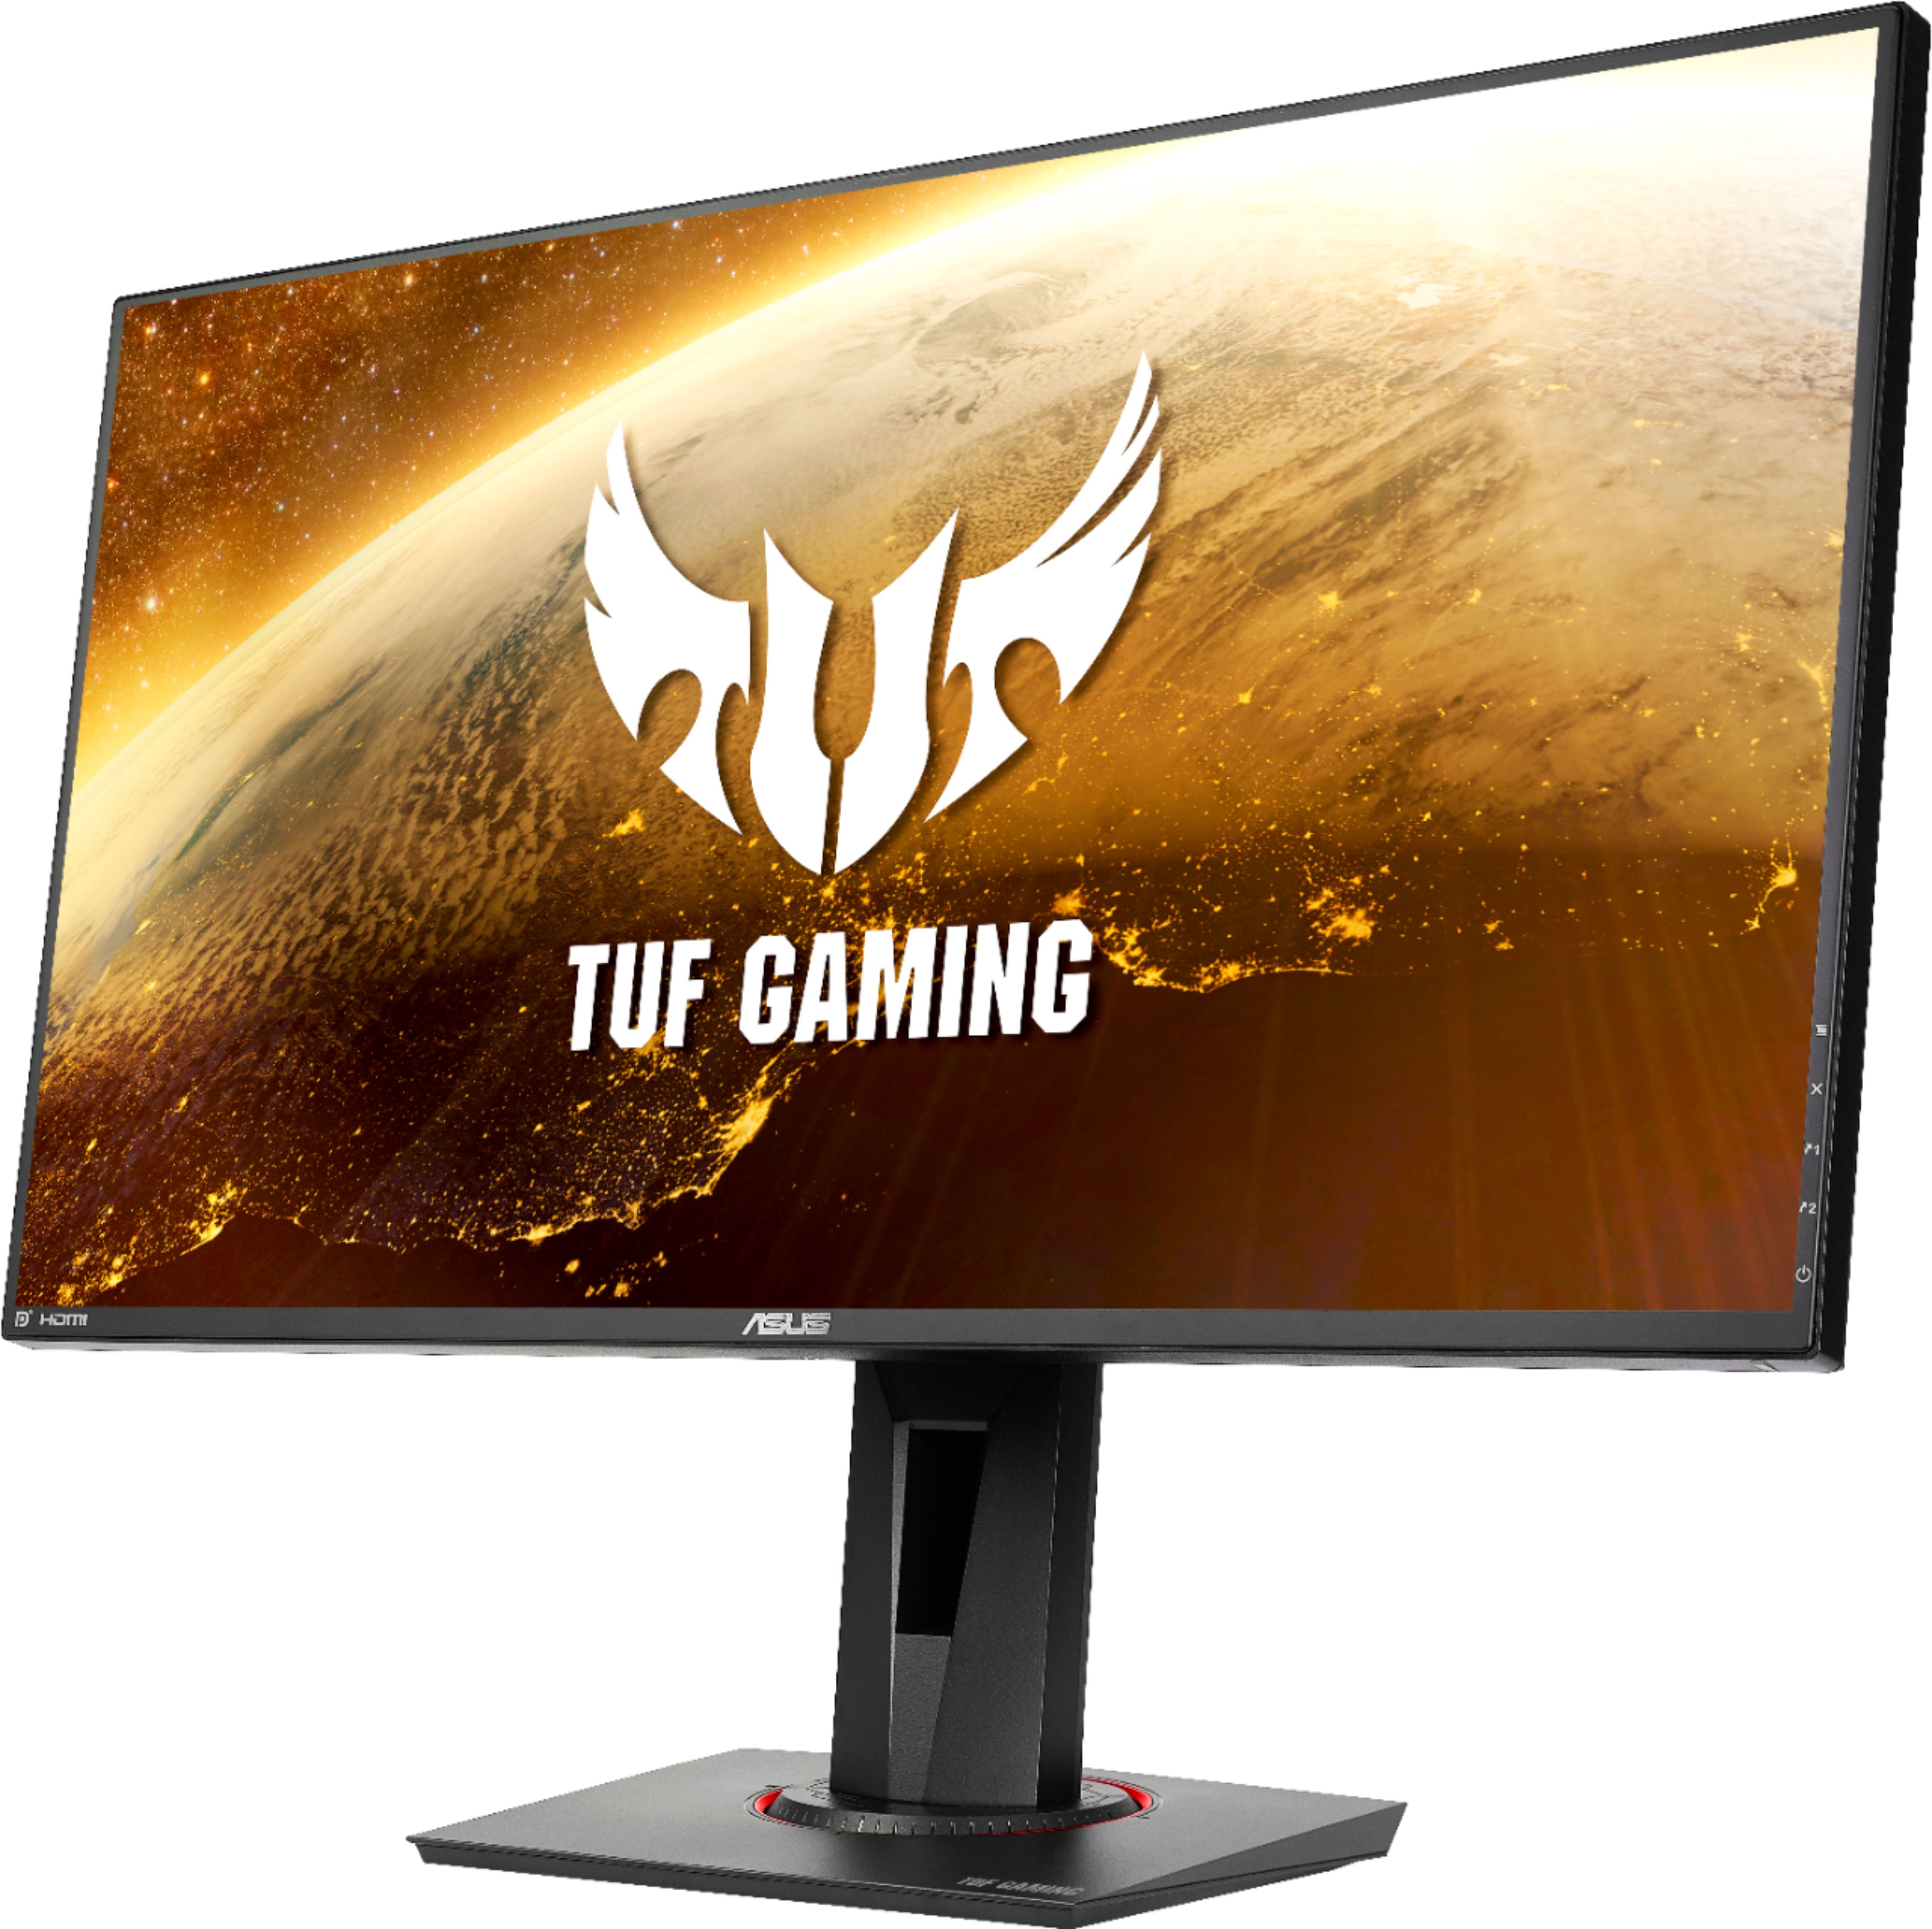 ASUS TUF 27” IPS LED FHD G-SYNC Gaming Monitor with HDR400